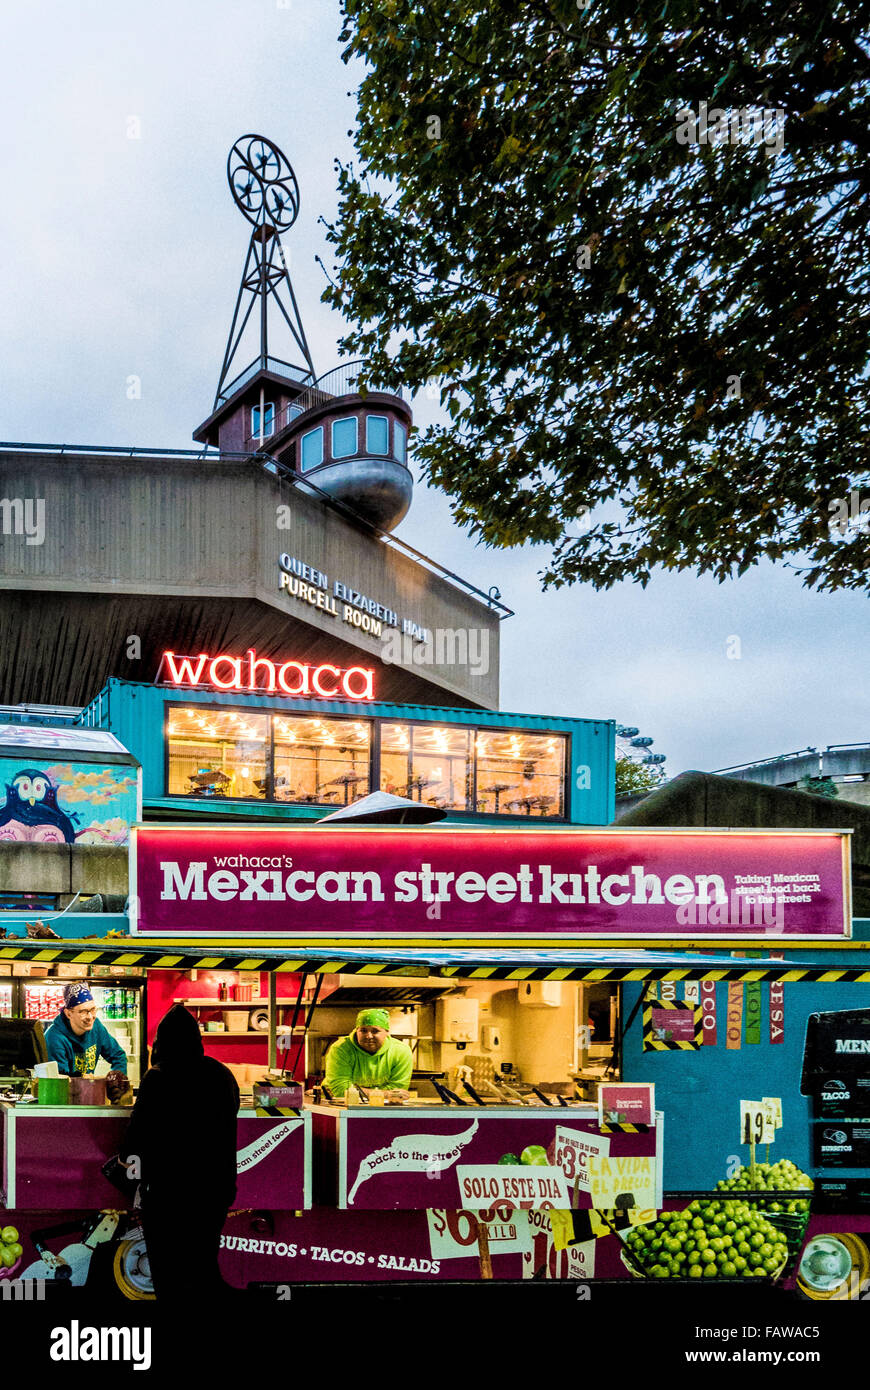 Queen Elizabeth Hall, Purcell Room and Wahaca Mexican restaurant at South Bank Centre, London, UK. Stock Photo